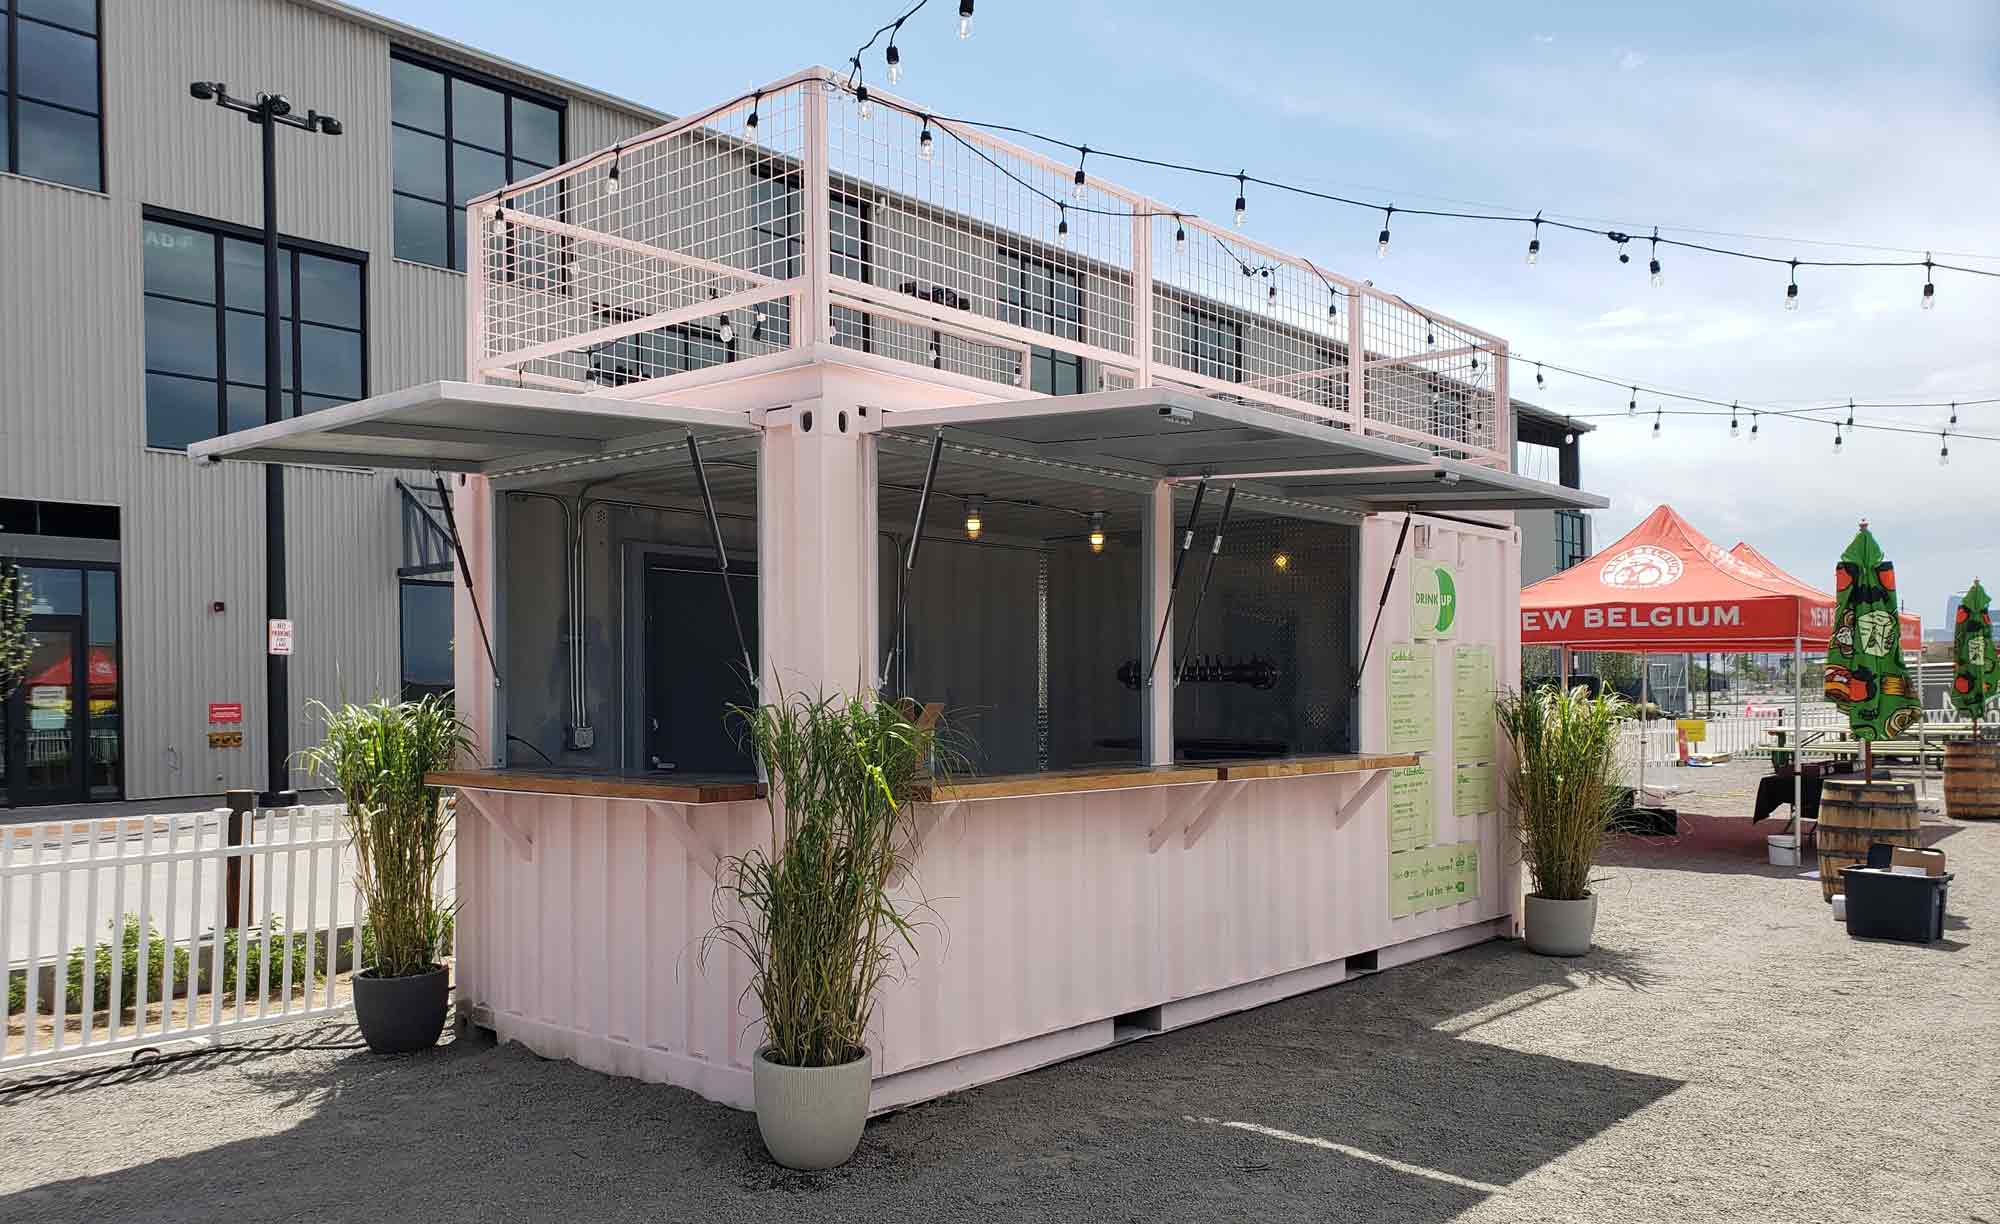 ROXBOX Containers Shipping Container Bar built or Two Parts Denver